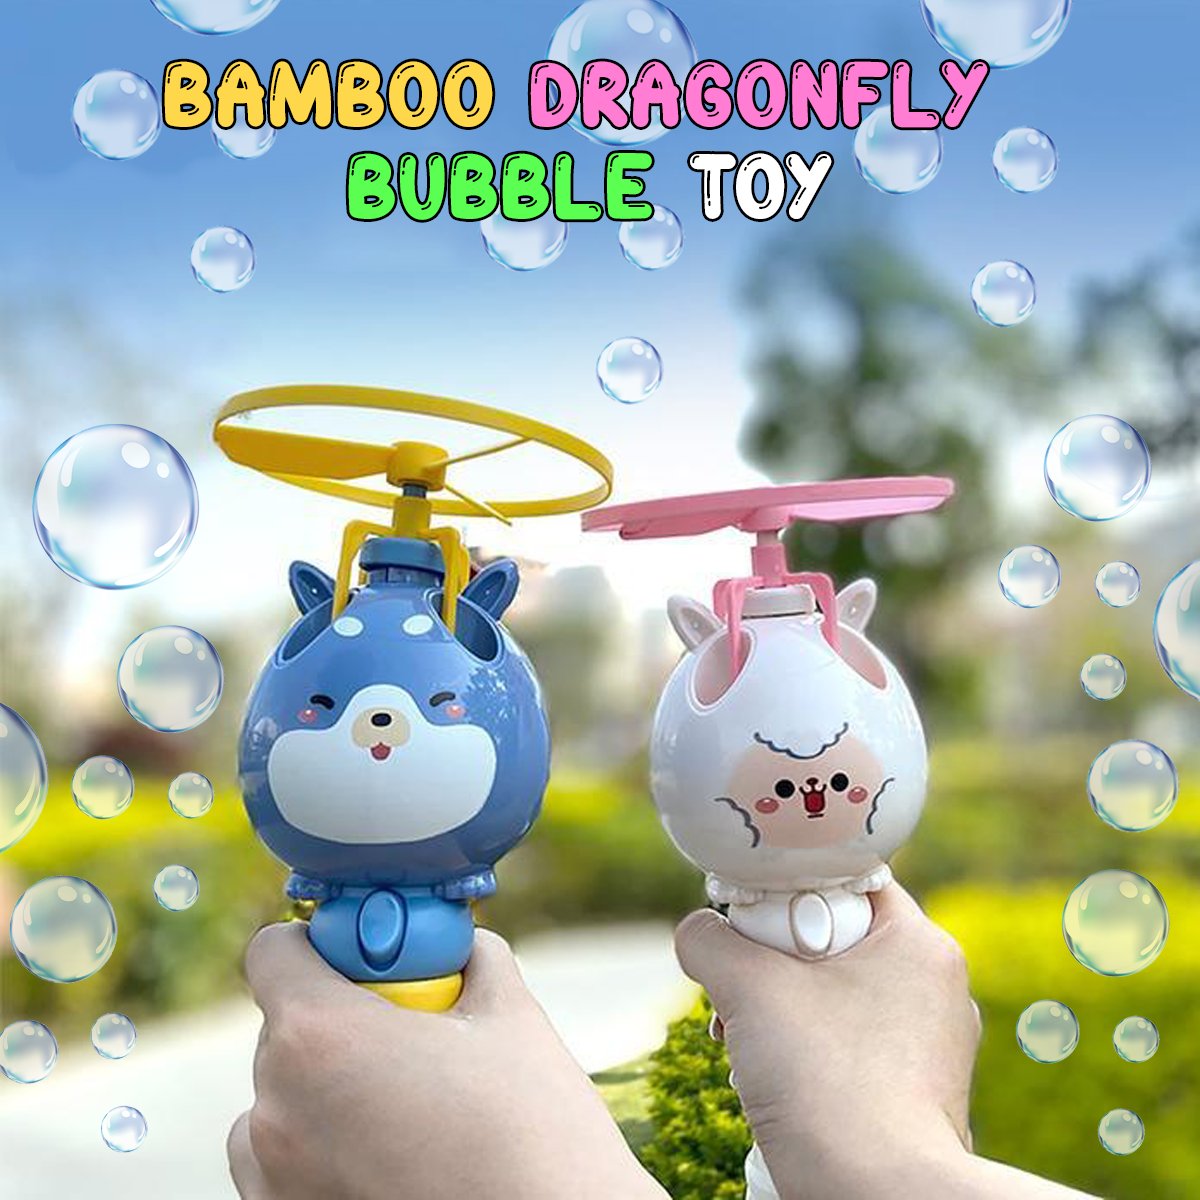 Bamboo Dragonfly Bubble Toy(BUY 3 FREE SHIPPING)